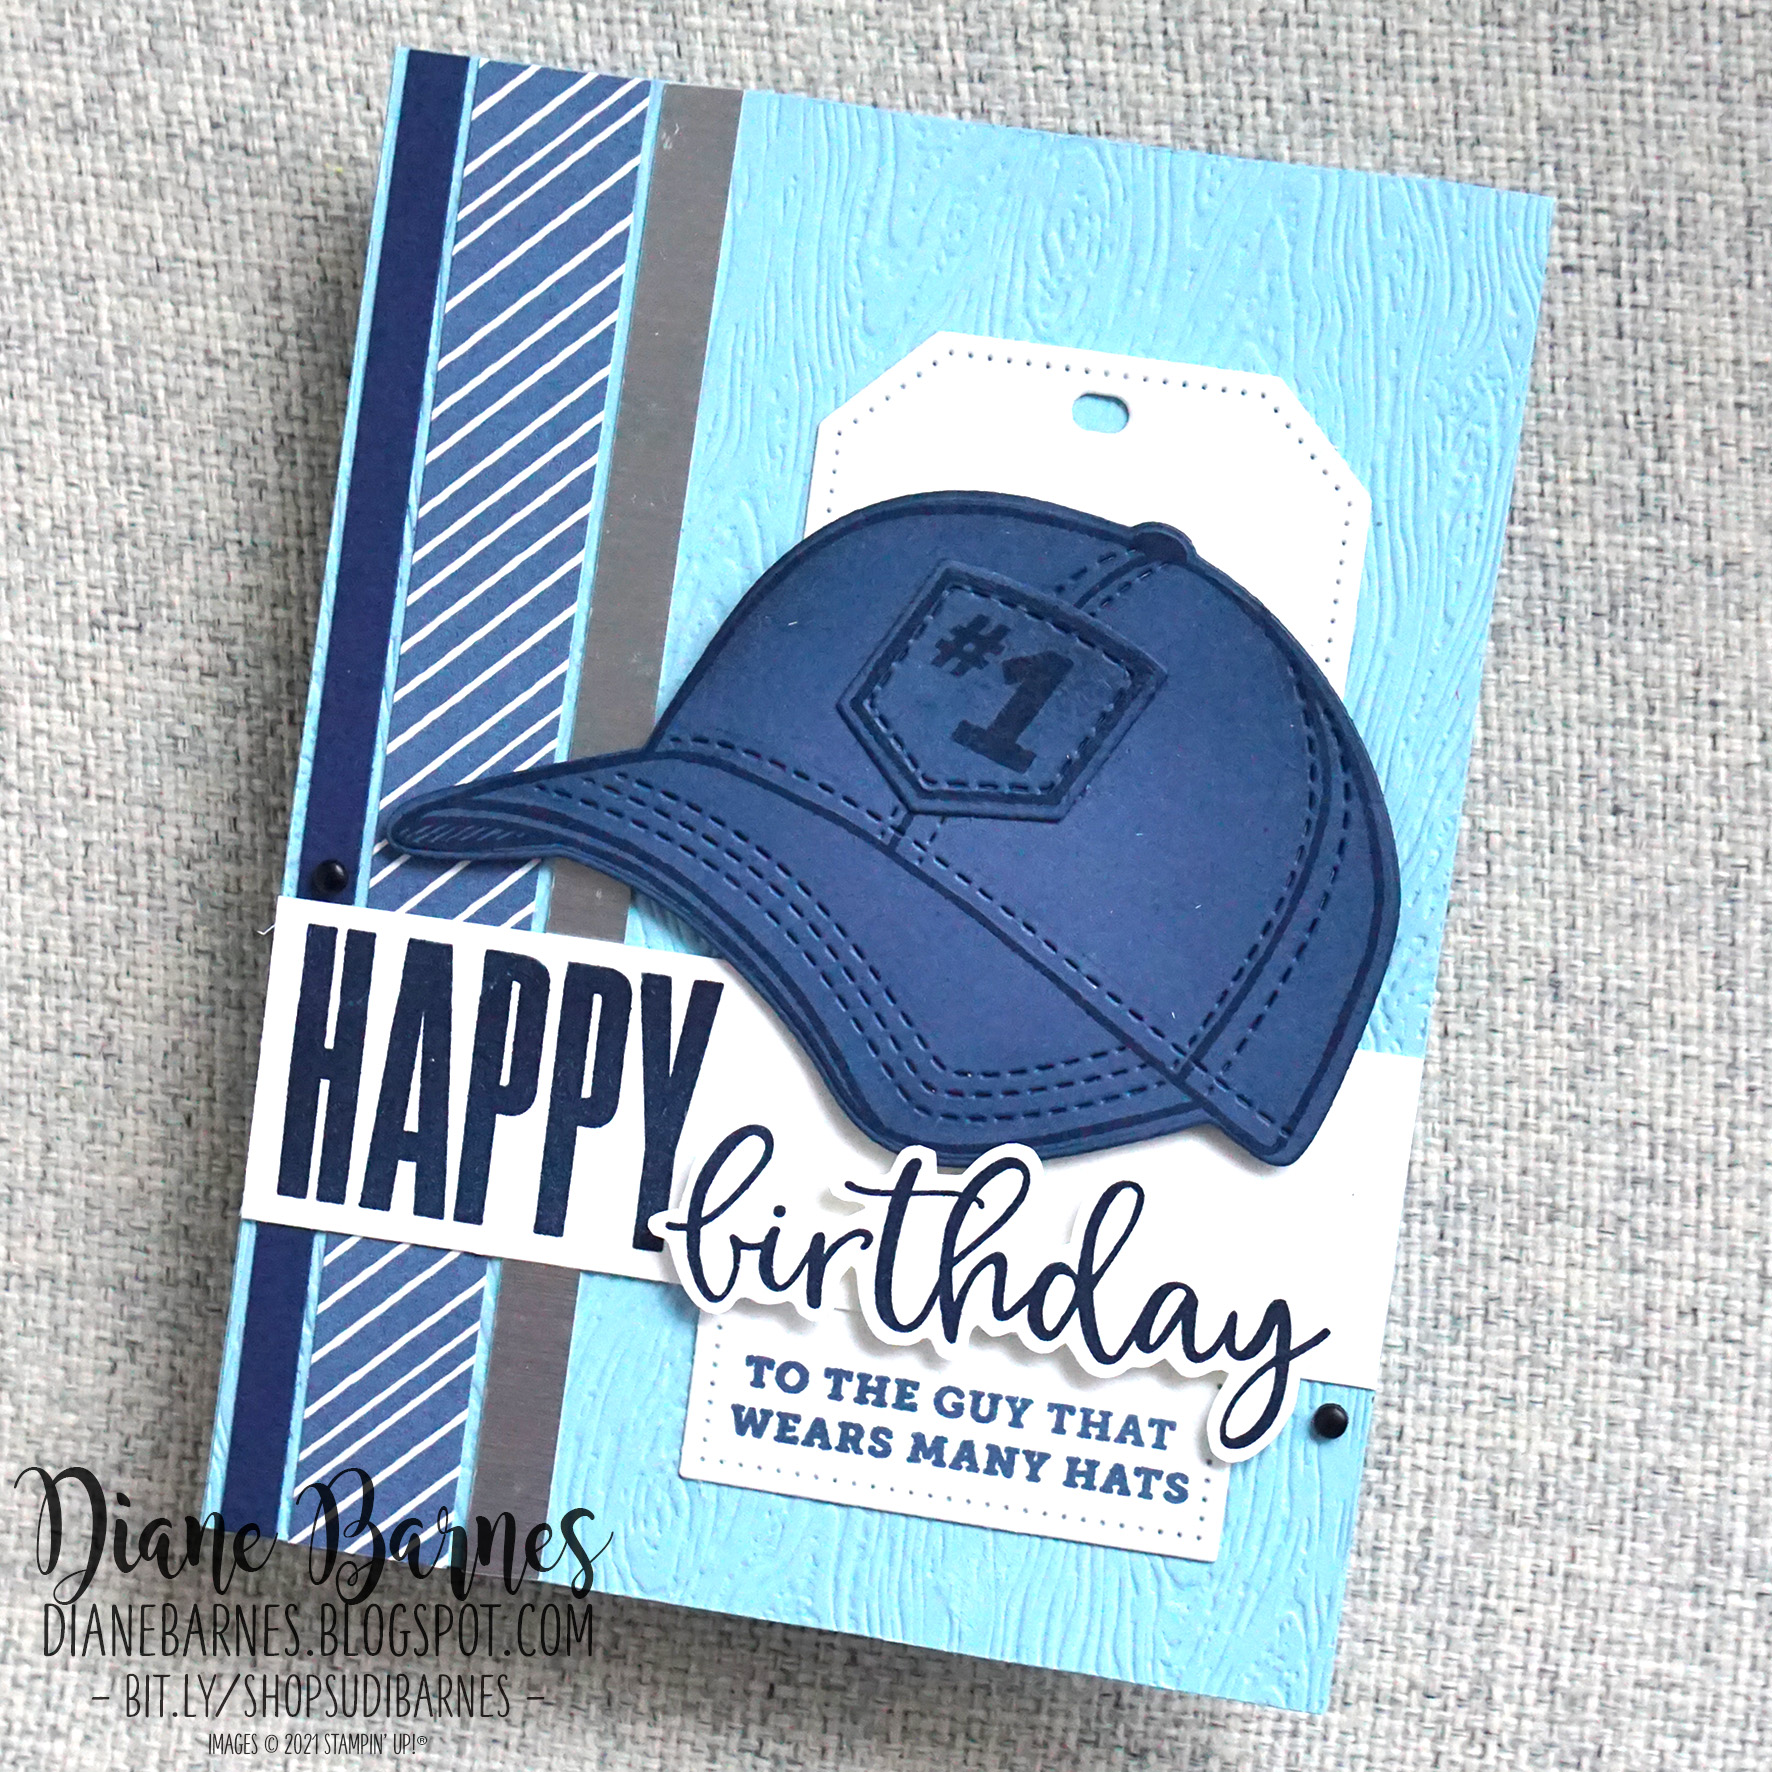 NEW! Stampin' Up! Biggest Wish Happy Birthday Card & Tag